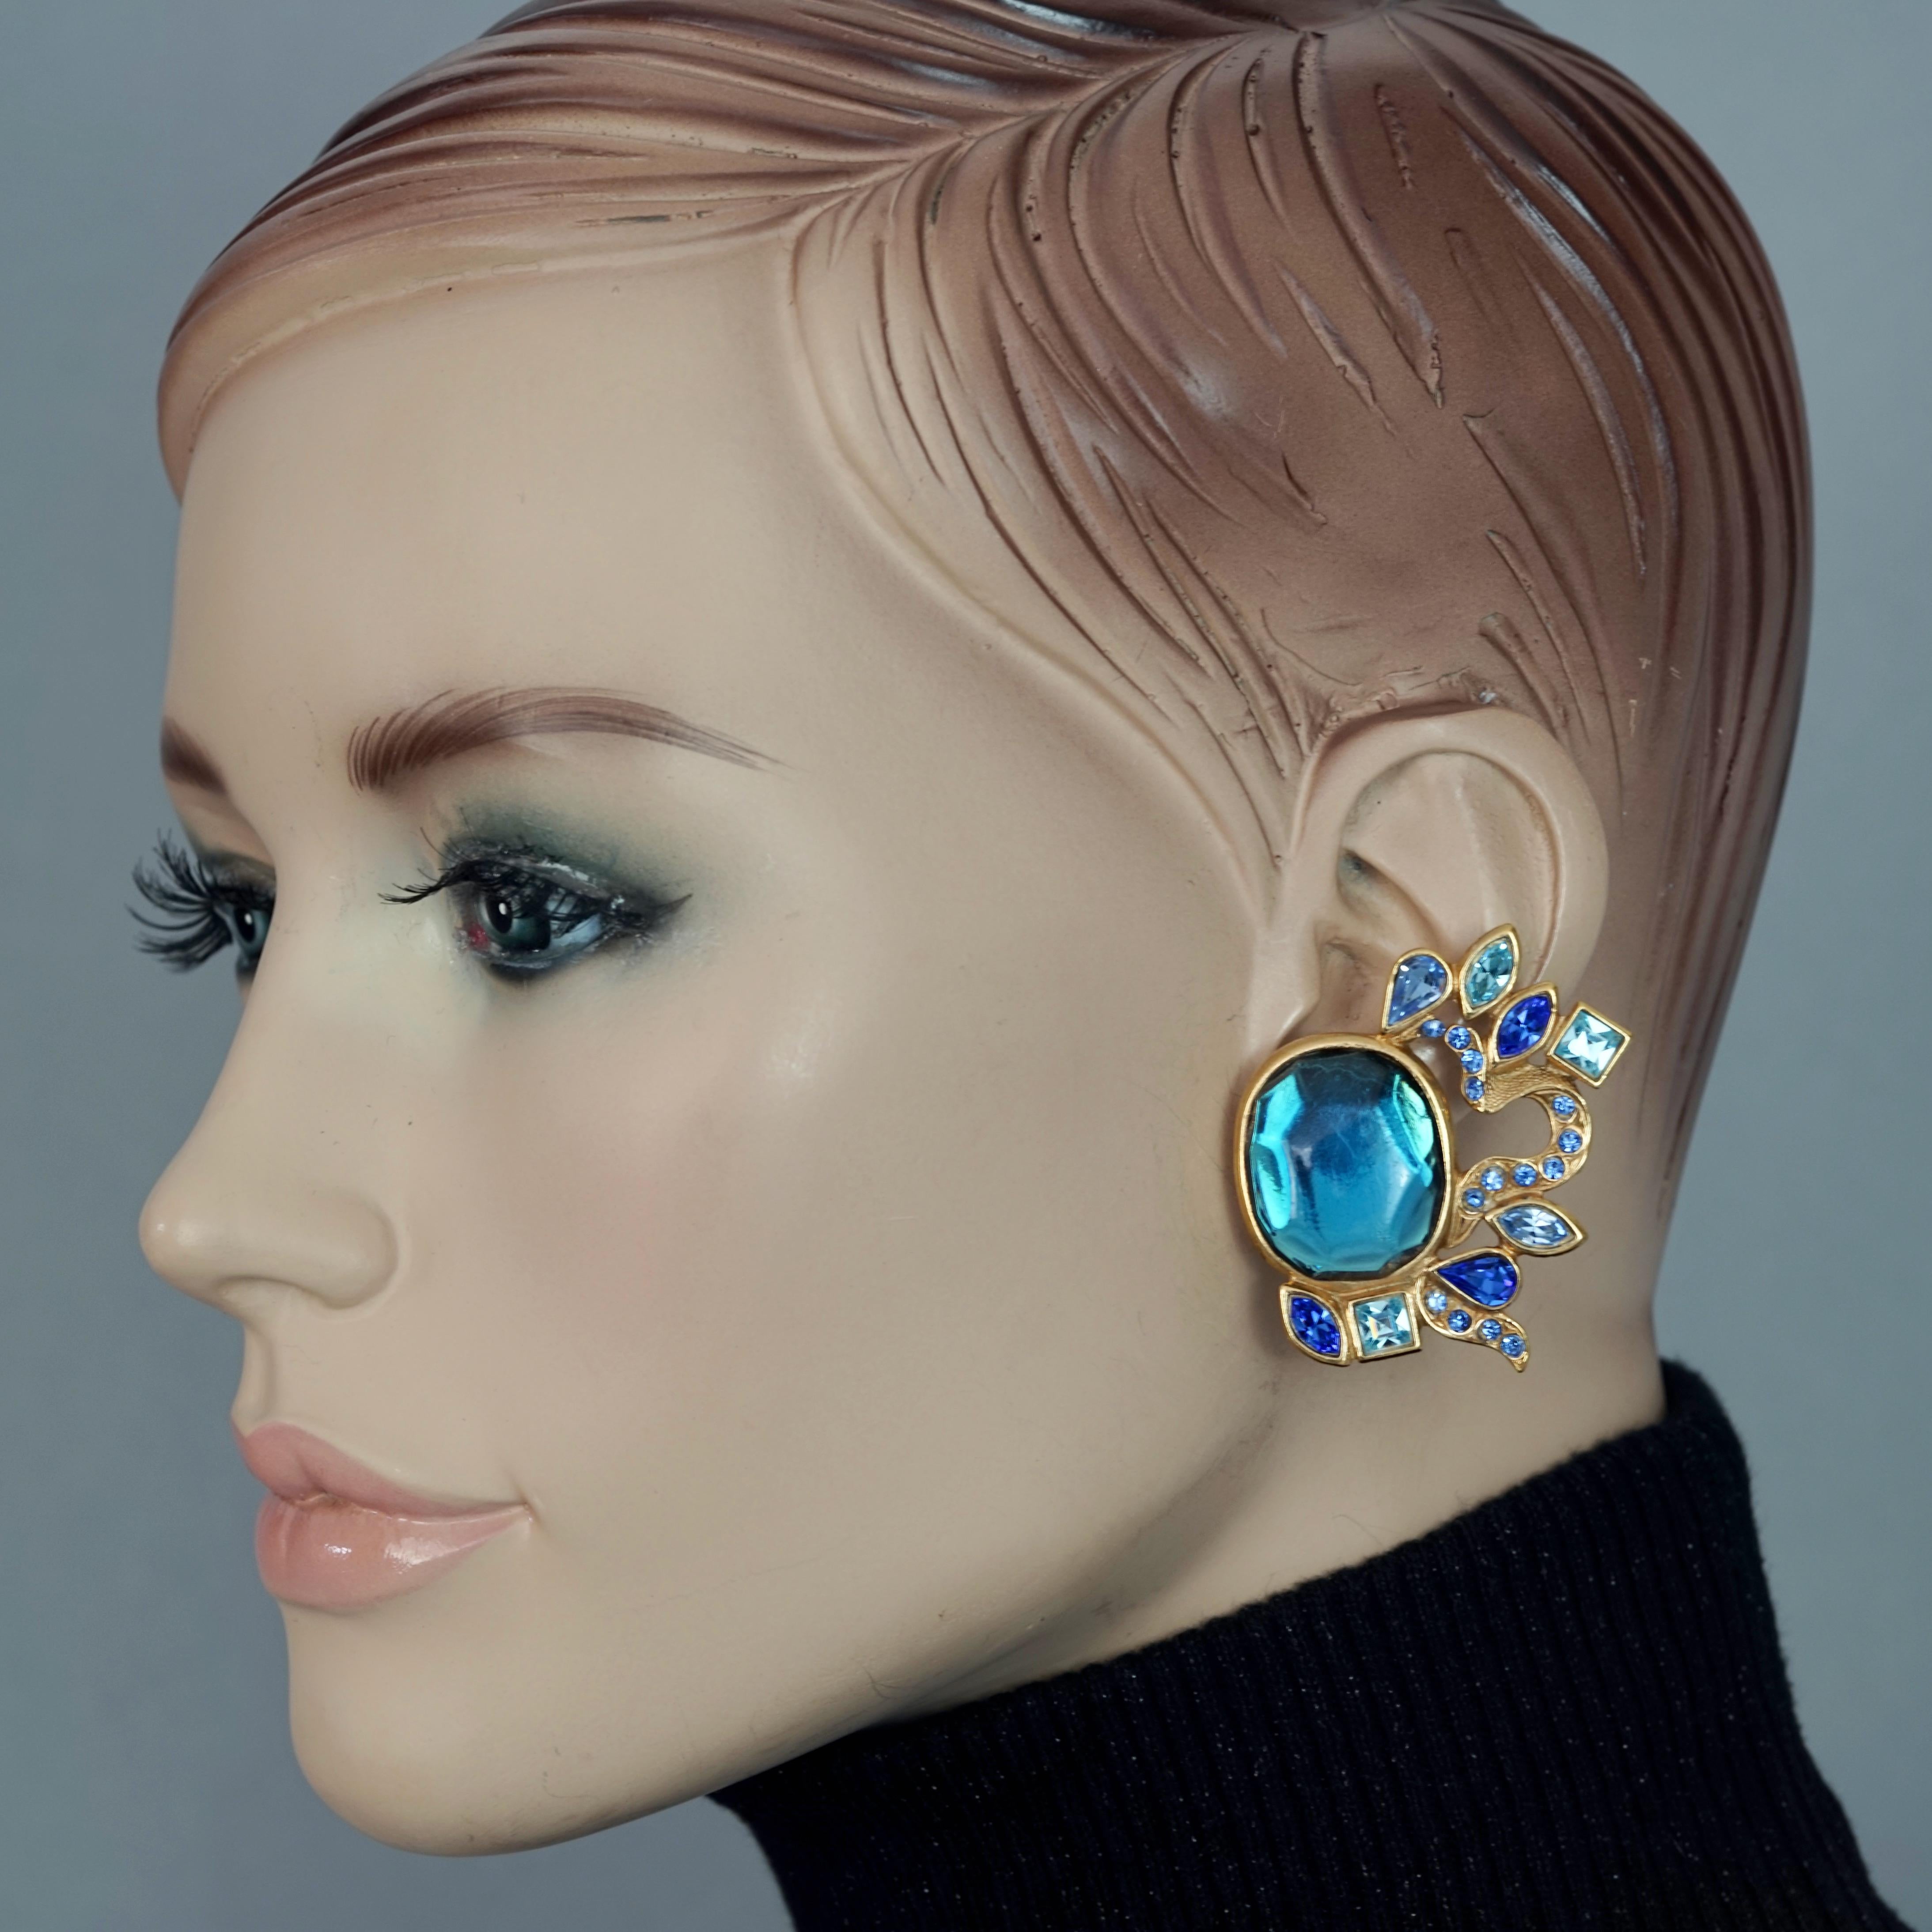 Vintage YVES SAINT LAURENT Ysl by Goossens Ornate Faceted Blue Stone Earrings

Measurements:
RIGHT EARRING
Height: 2.05 inches (5.2 cms)
Width: 1.65 inches (4.2 cms)
Weight: 19 grams

LEFT EARRING
Height: 1.89 inches (4.8 cms)
Width: 1.50 inches